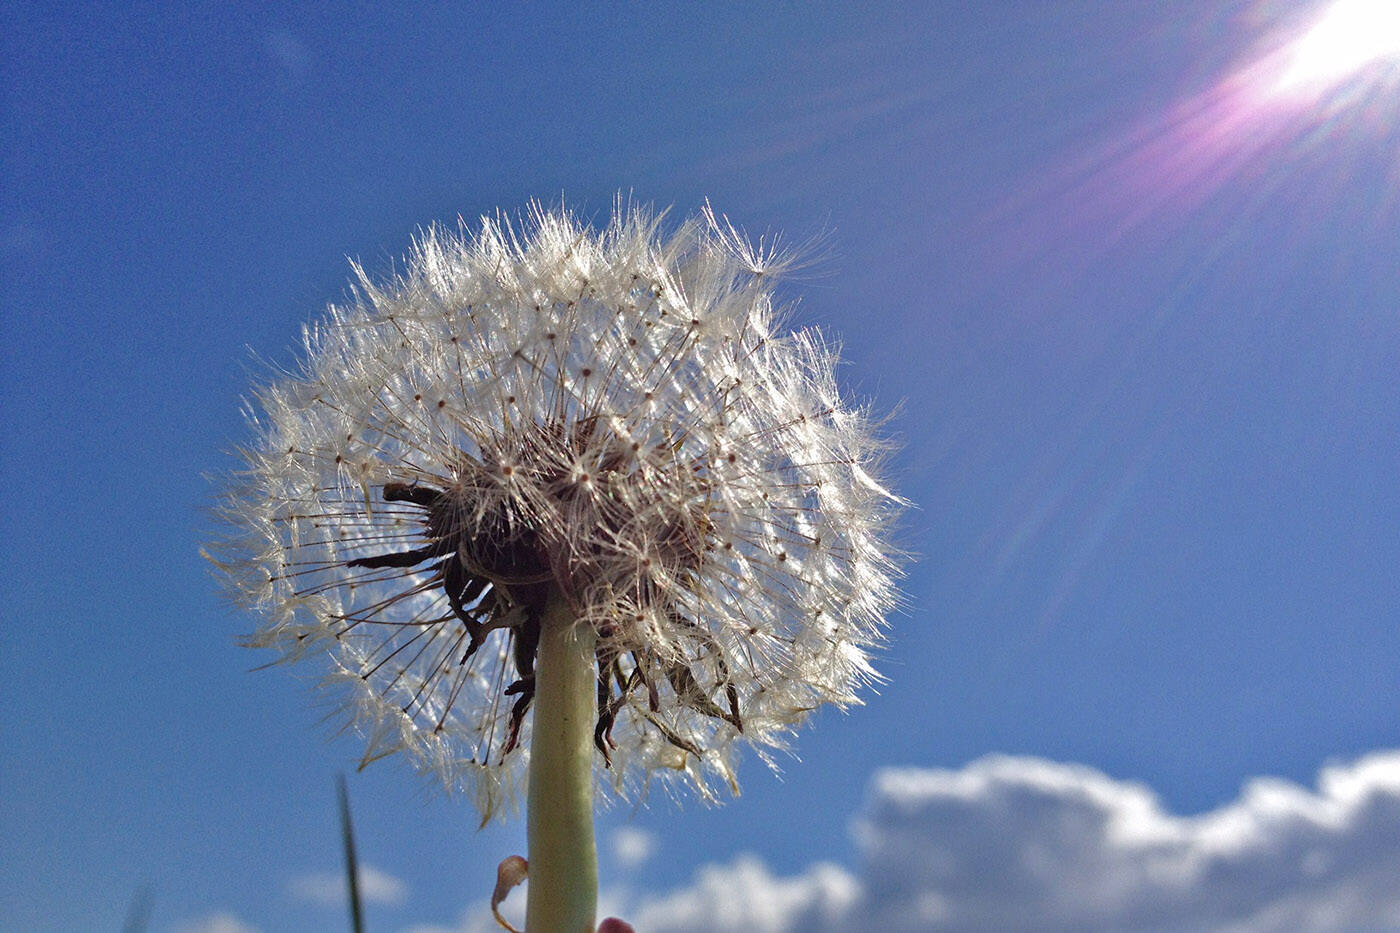 The sun shines down on a dandelion clock in Chilliwack on April 16, 2013. Monday, March 28, 2022 is Weed Appreciation Day. (Jenna Hauck/ Chilliwack Progress file)